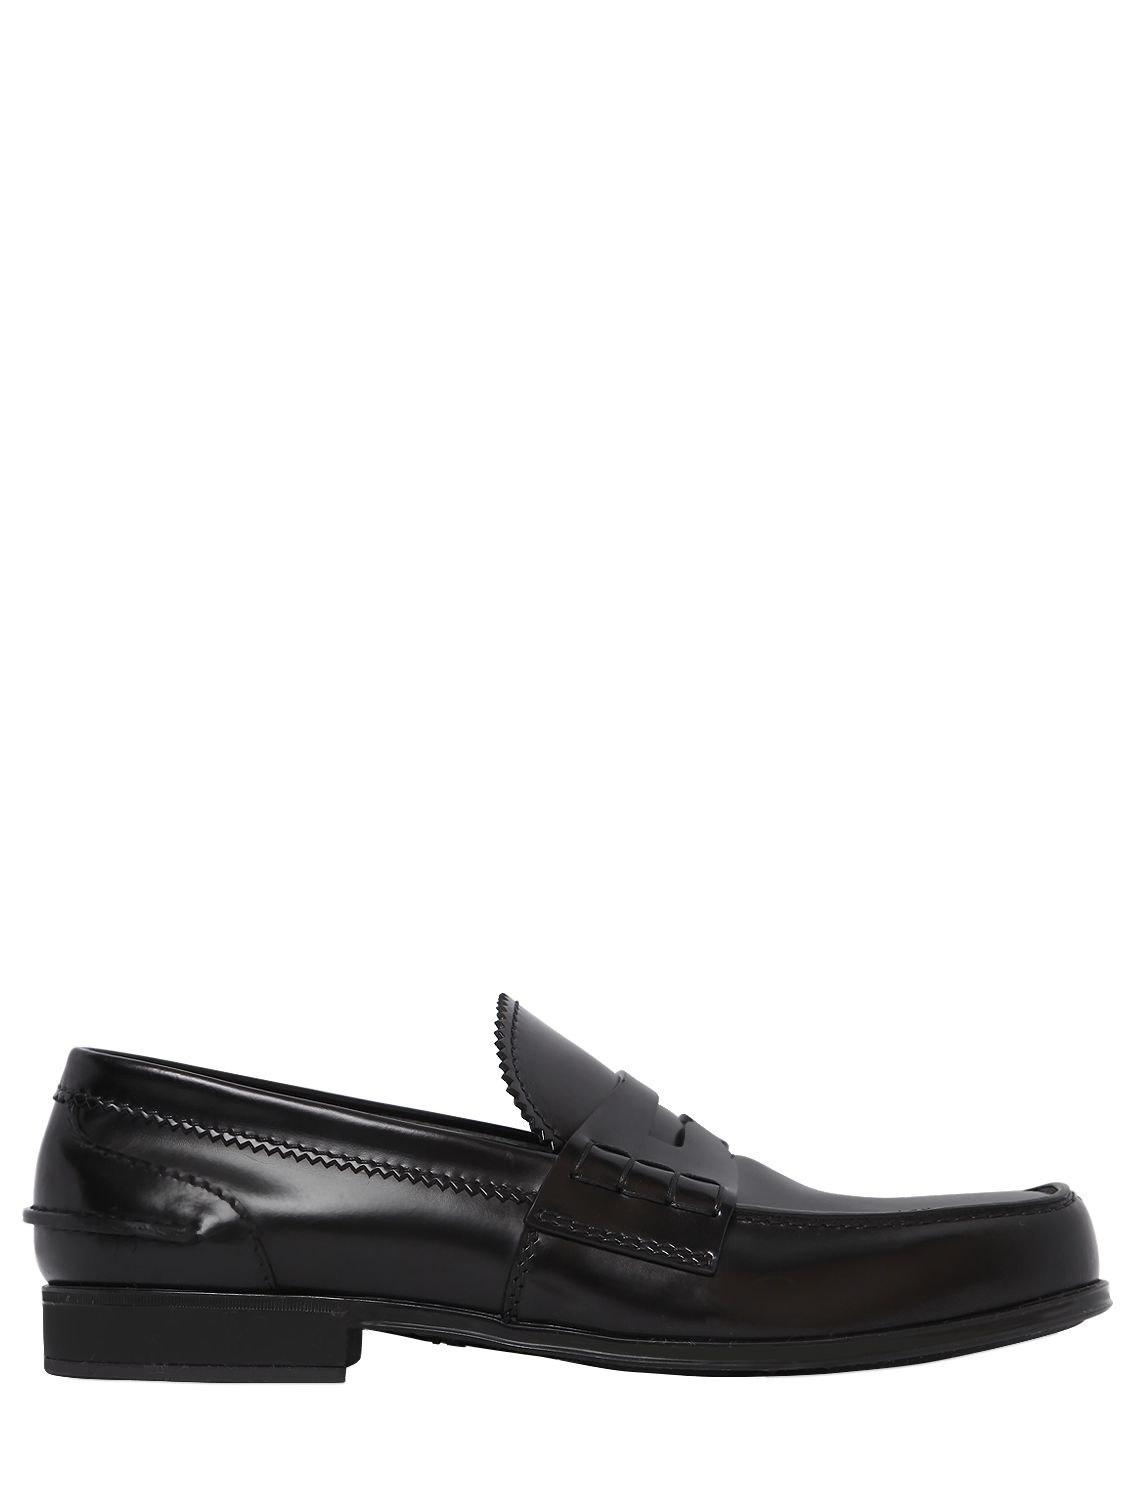 Prada Brushed Leather Penny Loafers in Black for Men - Lyst